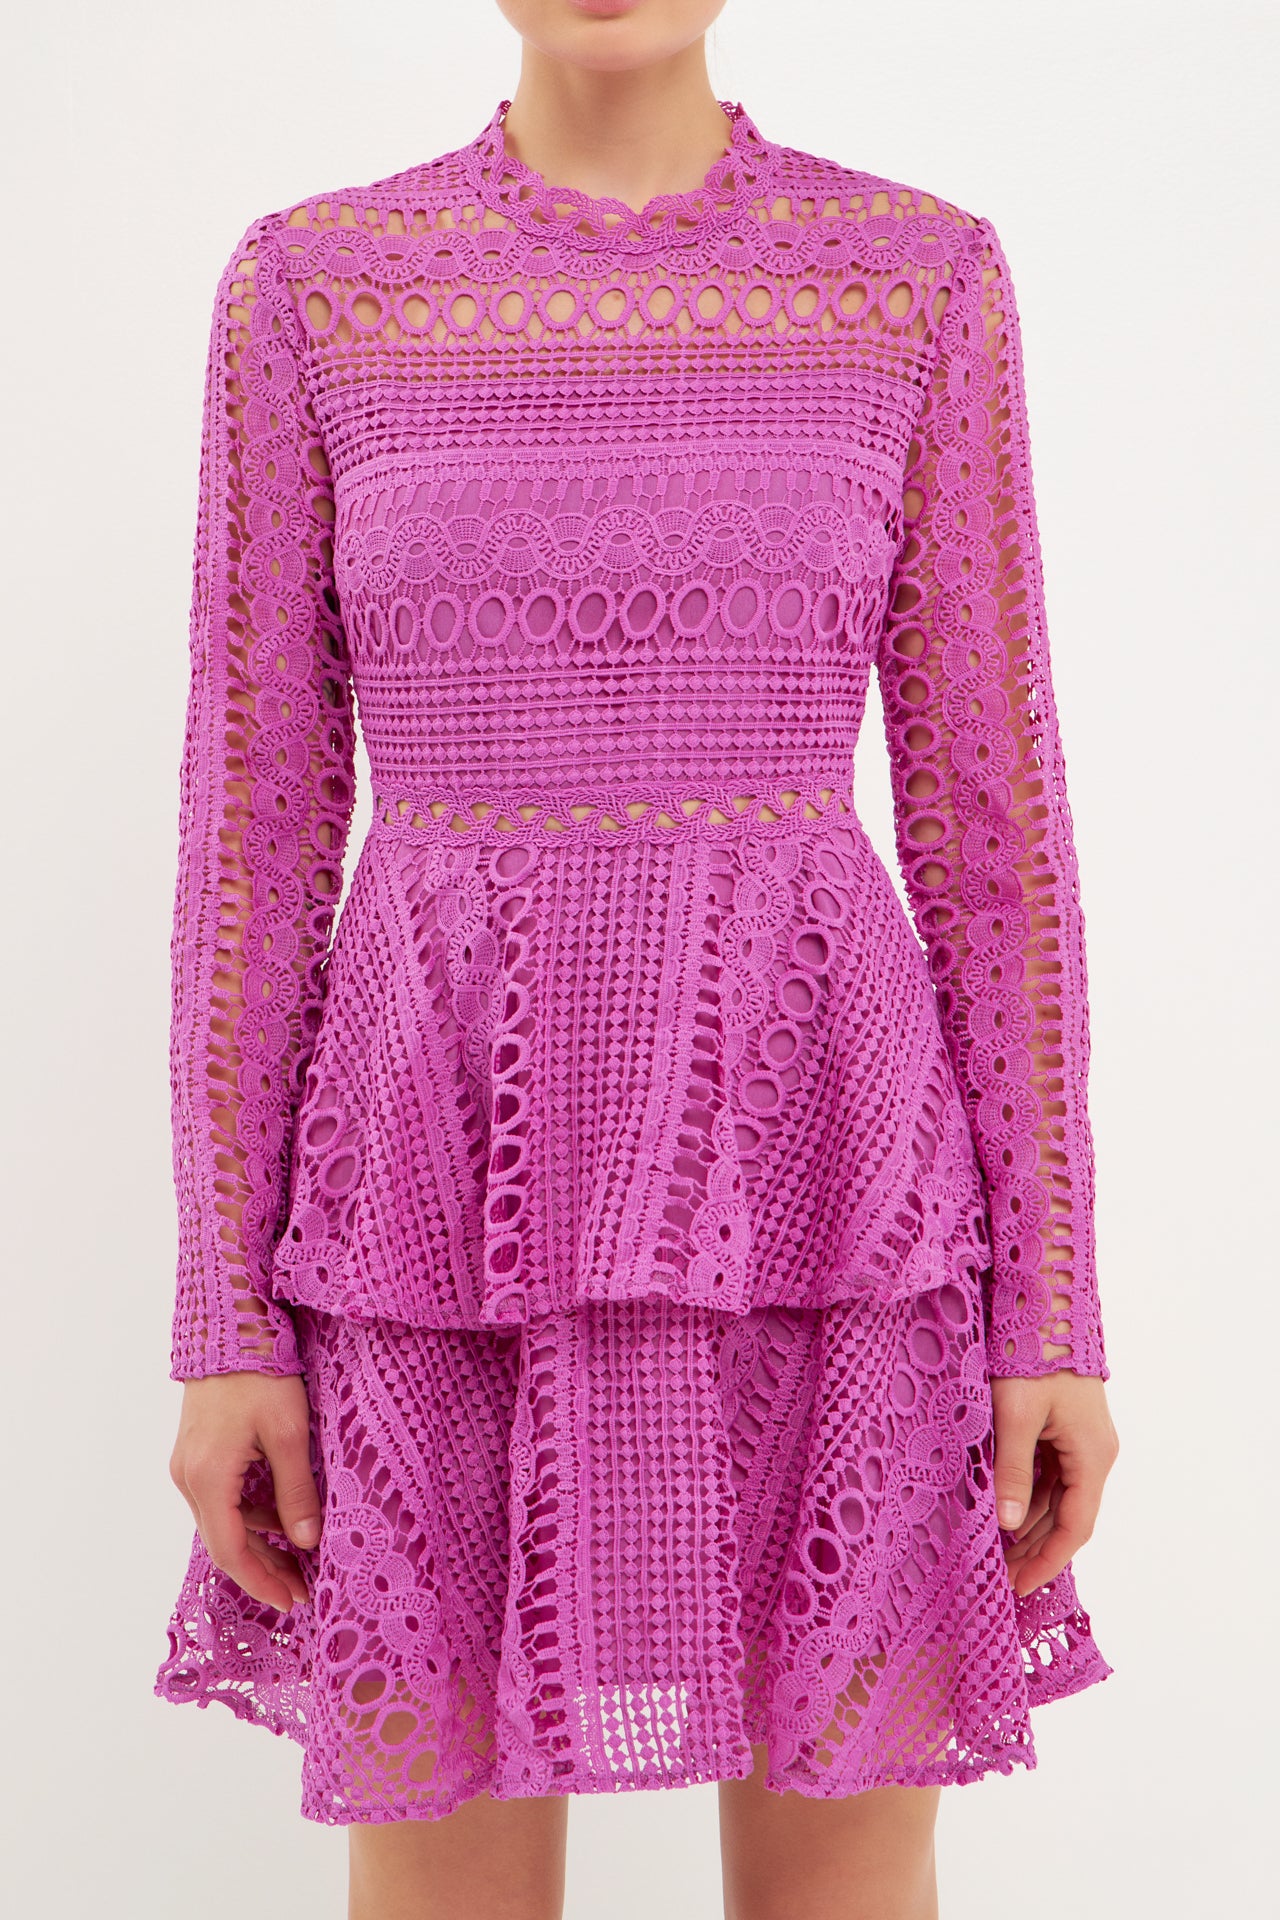 ENDLESS ROSE - Crochet Lace Mini Dress - DRESSES available at Objectrare